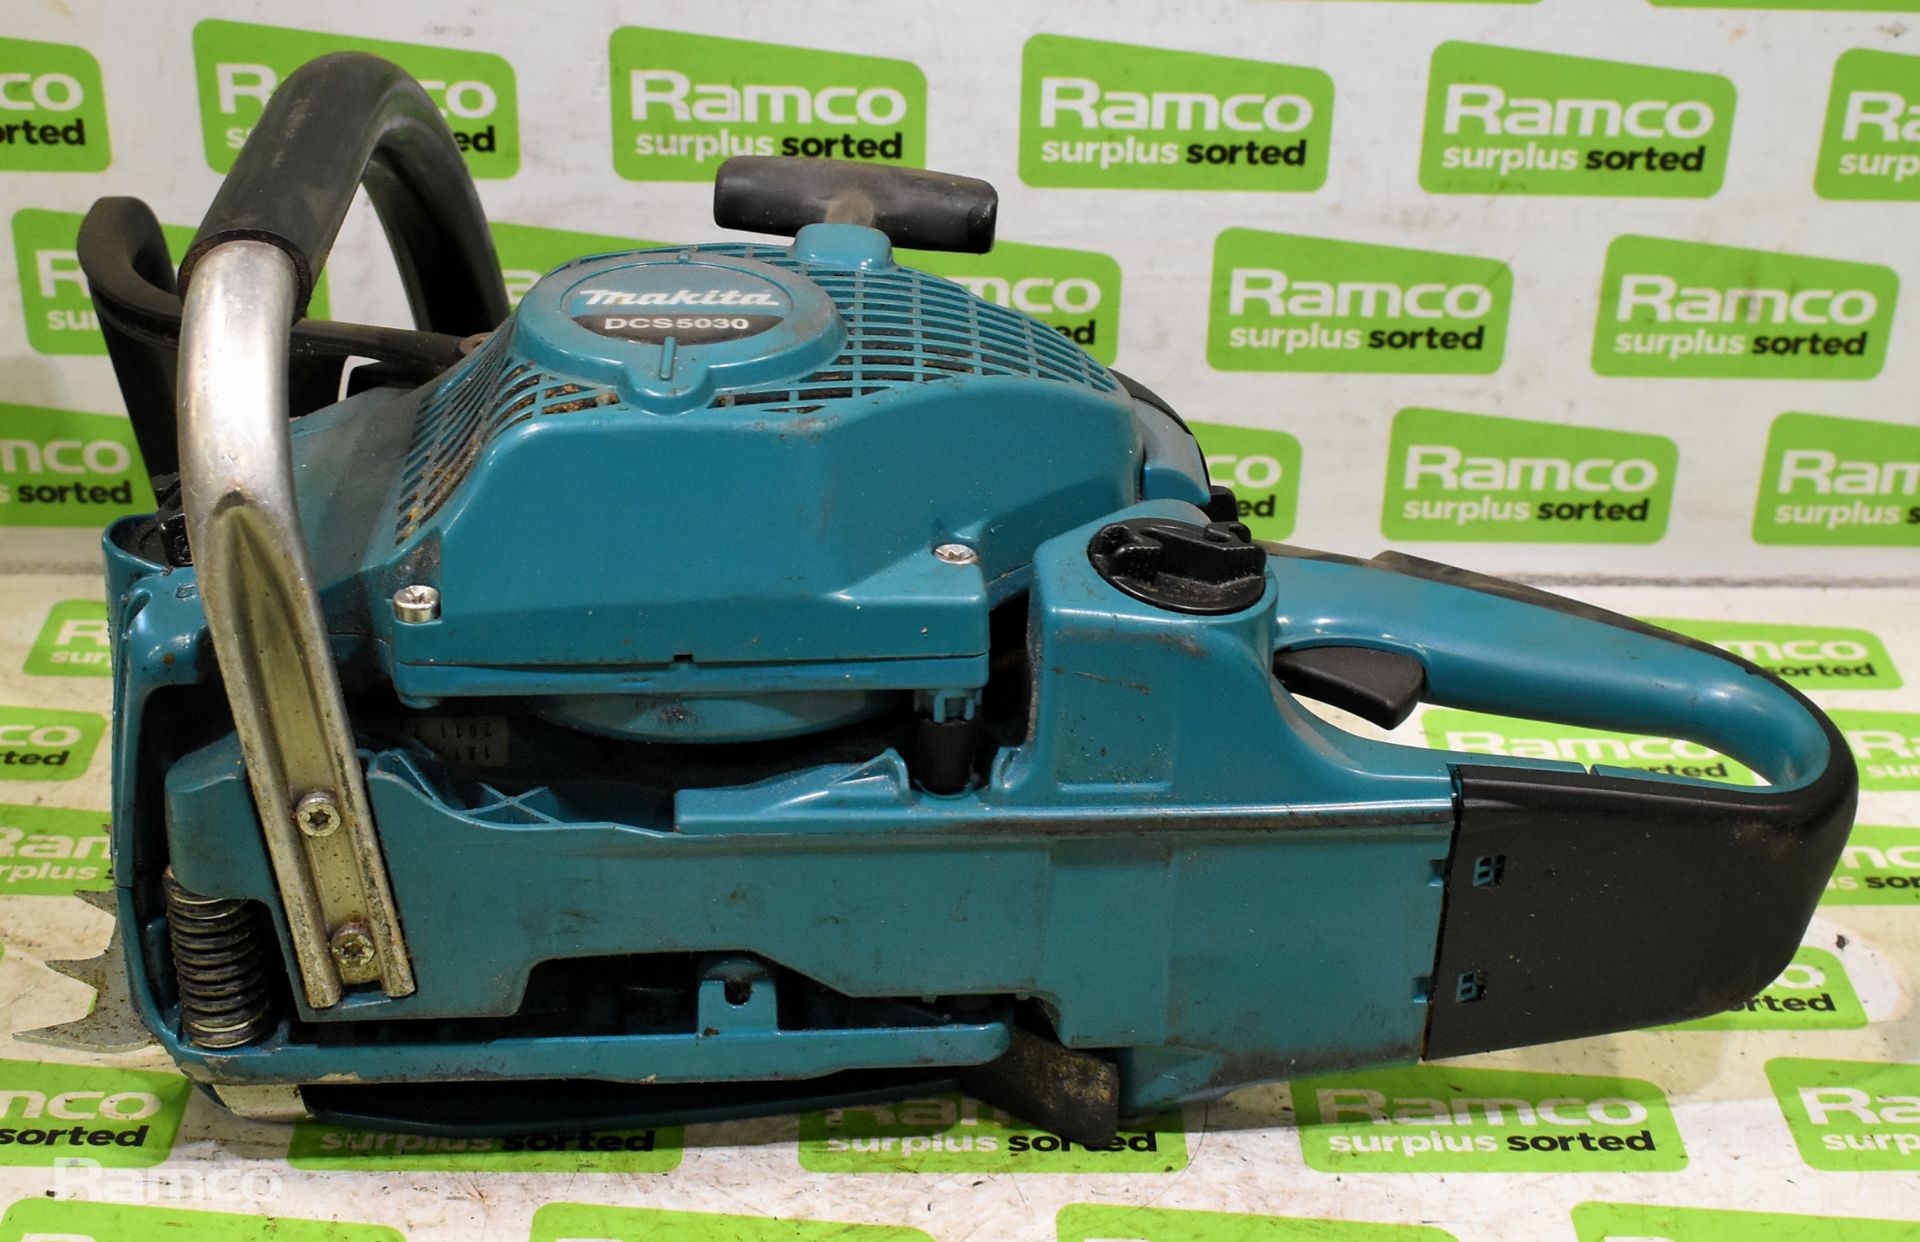 6x Makita DCS5030 50cc petrol chainsaw - BODIES ONLY - AS SPARES & REPAIRS - Image 13 of 33